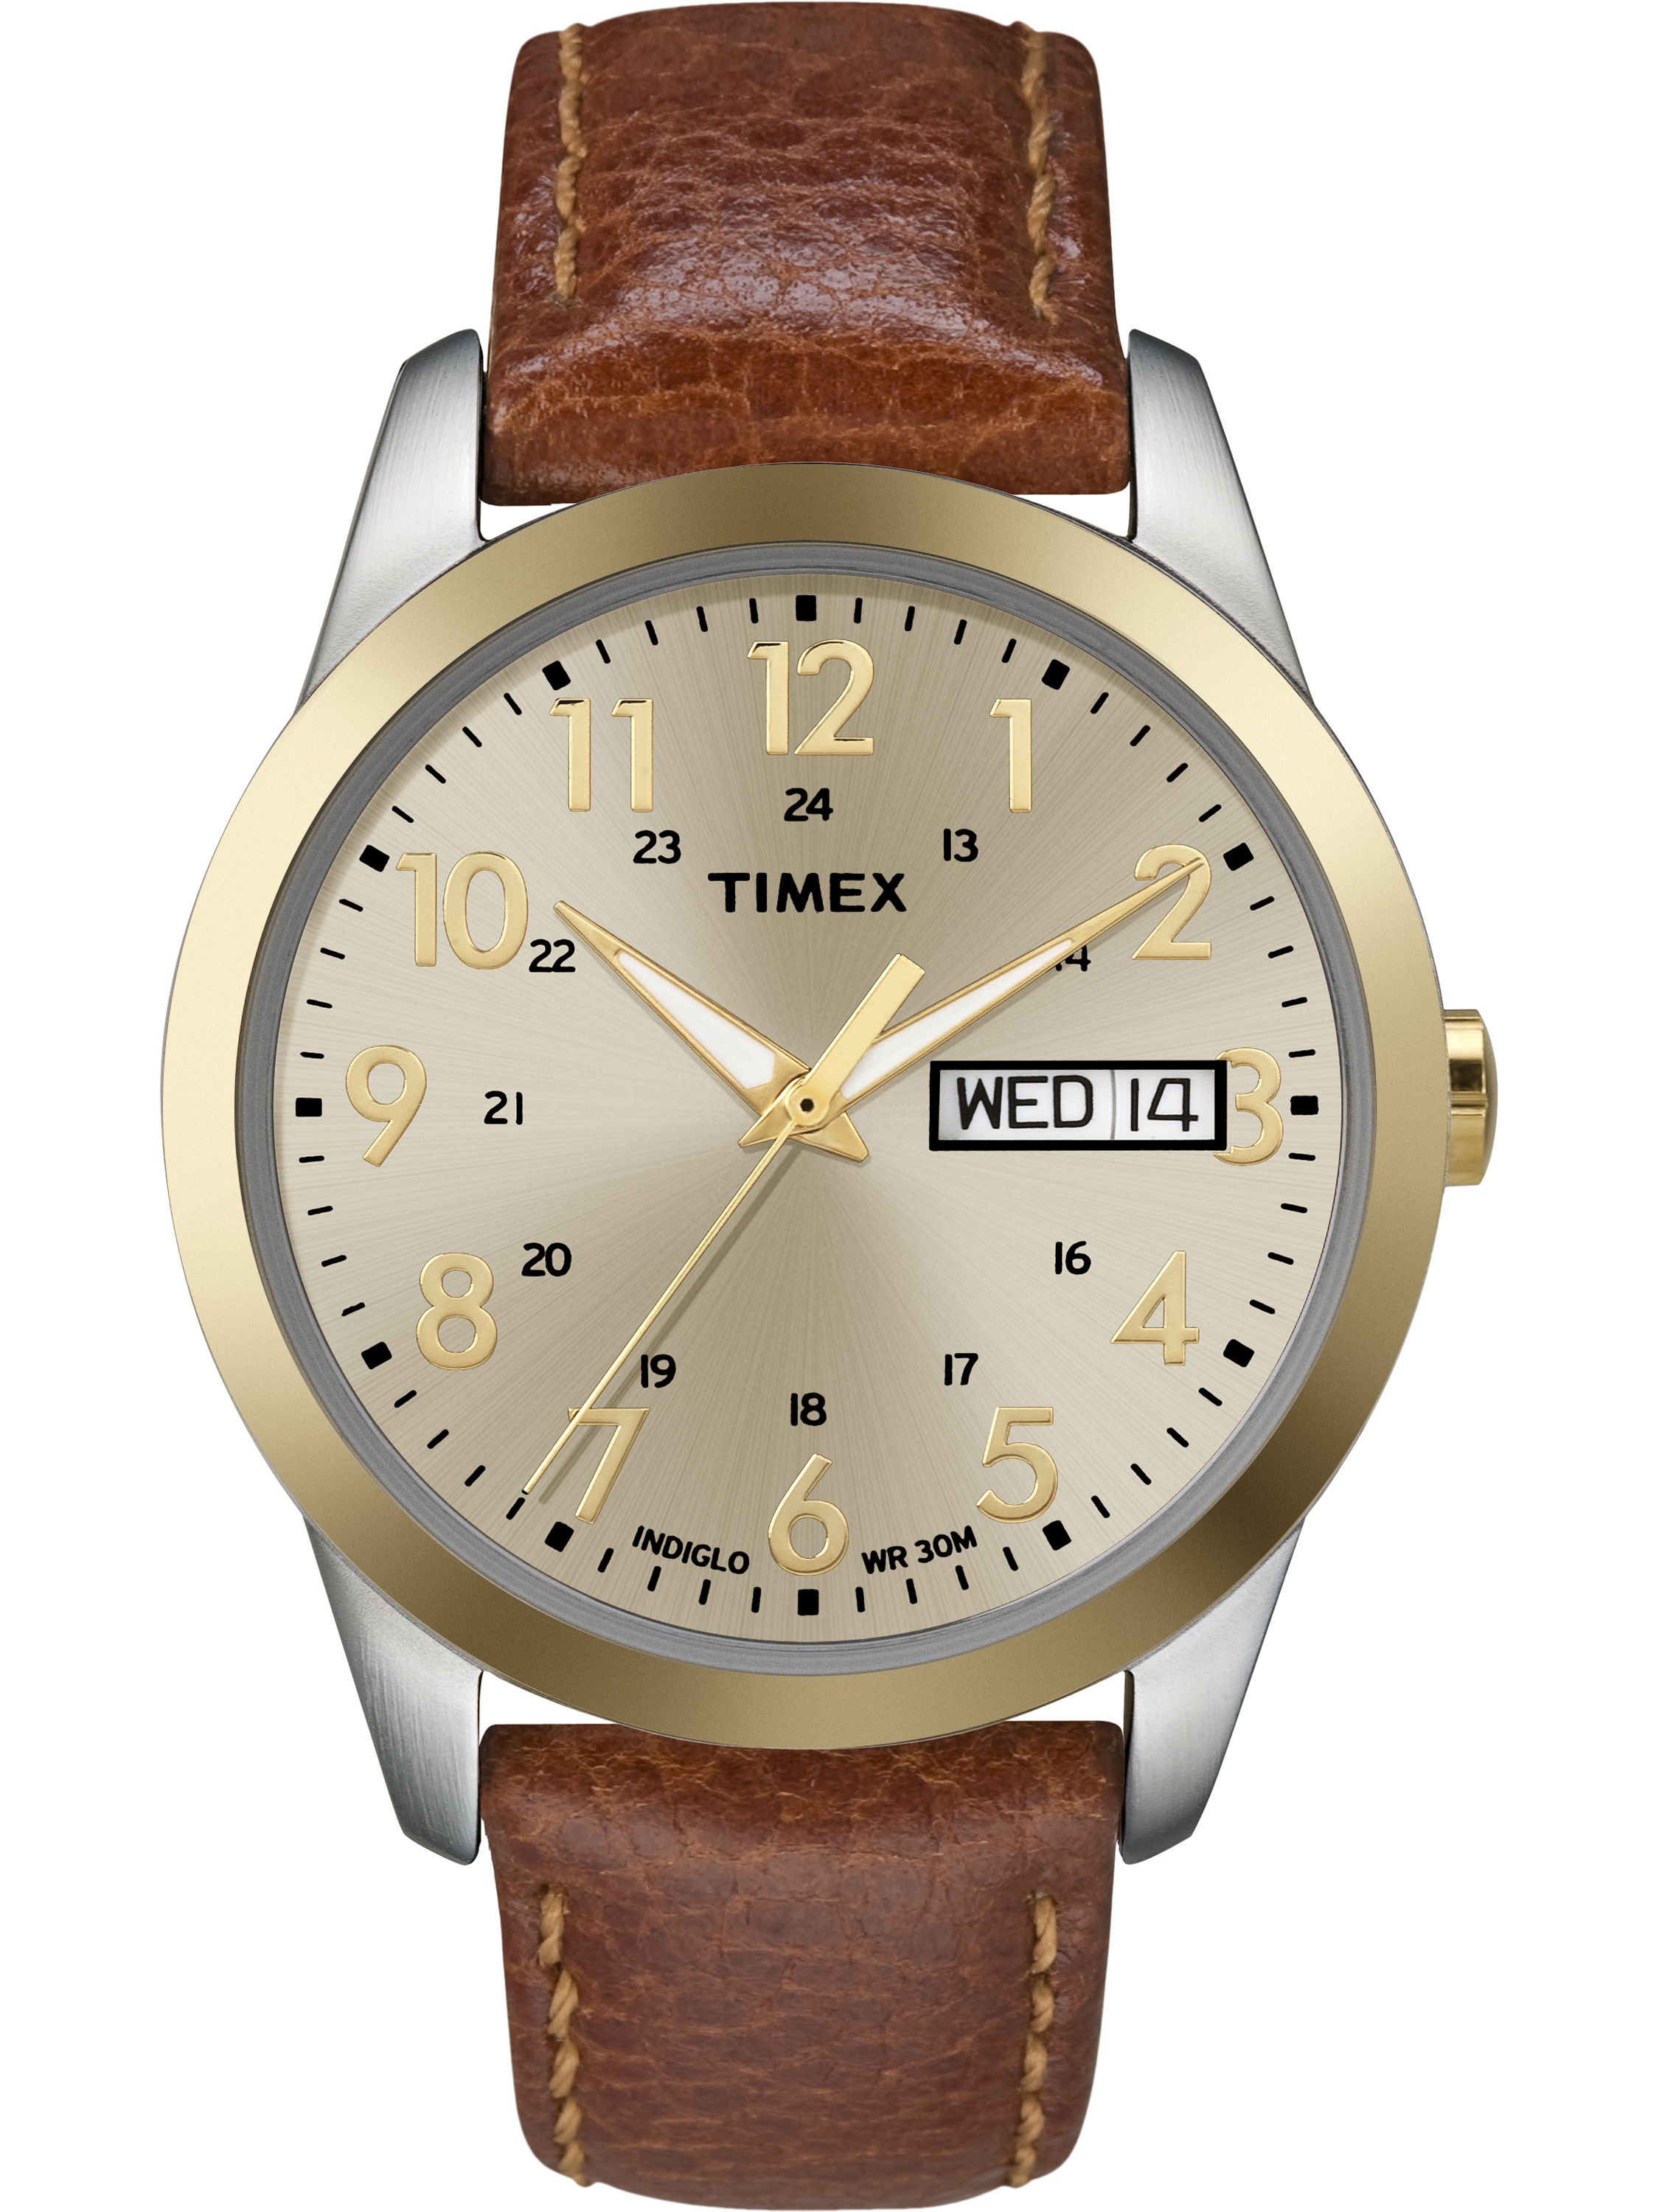 Men's South Street Sport Watch, Brown Leather Strap - image 1 of 3